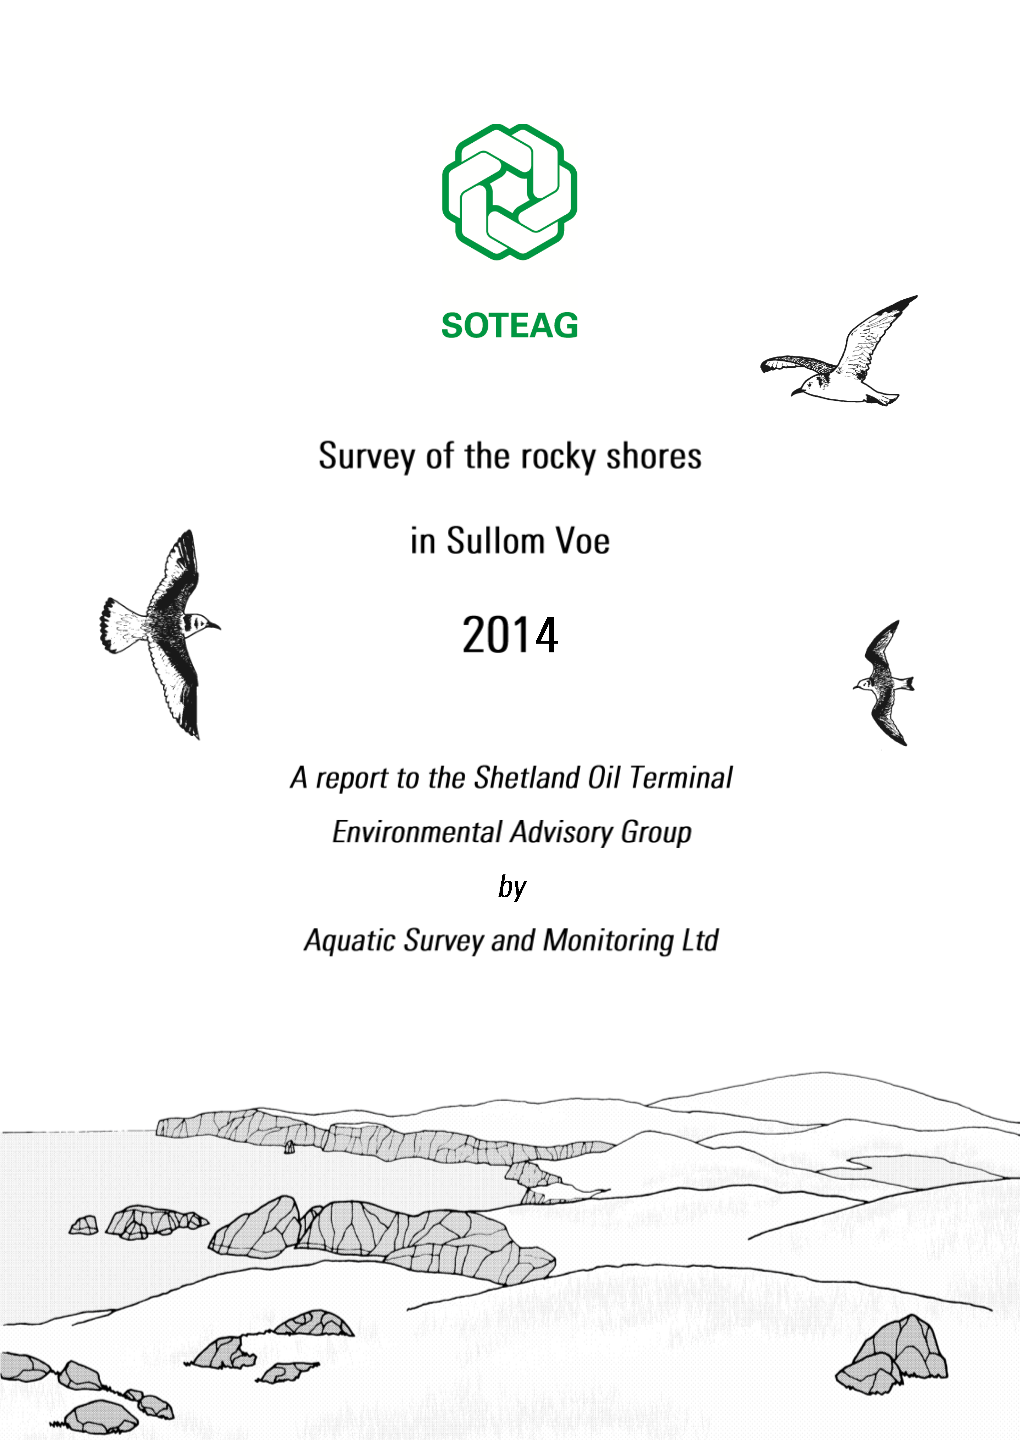 Survey of the Rocky Shores in the Region of Sullom Voe, Shetland, July / August 2014